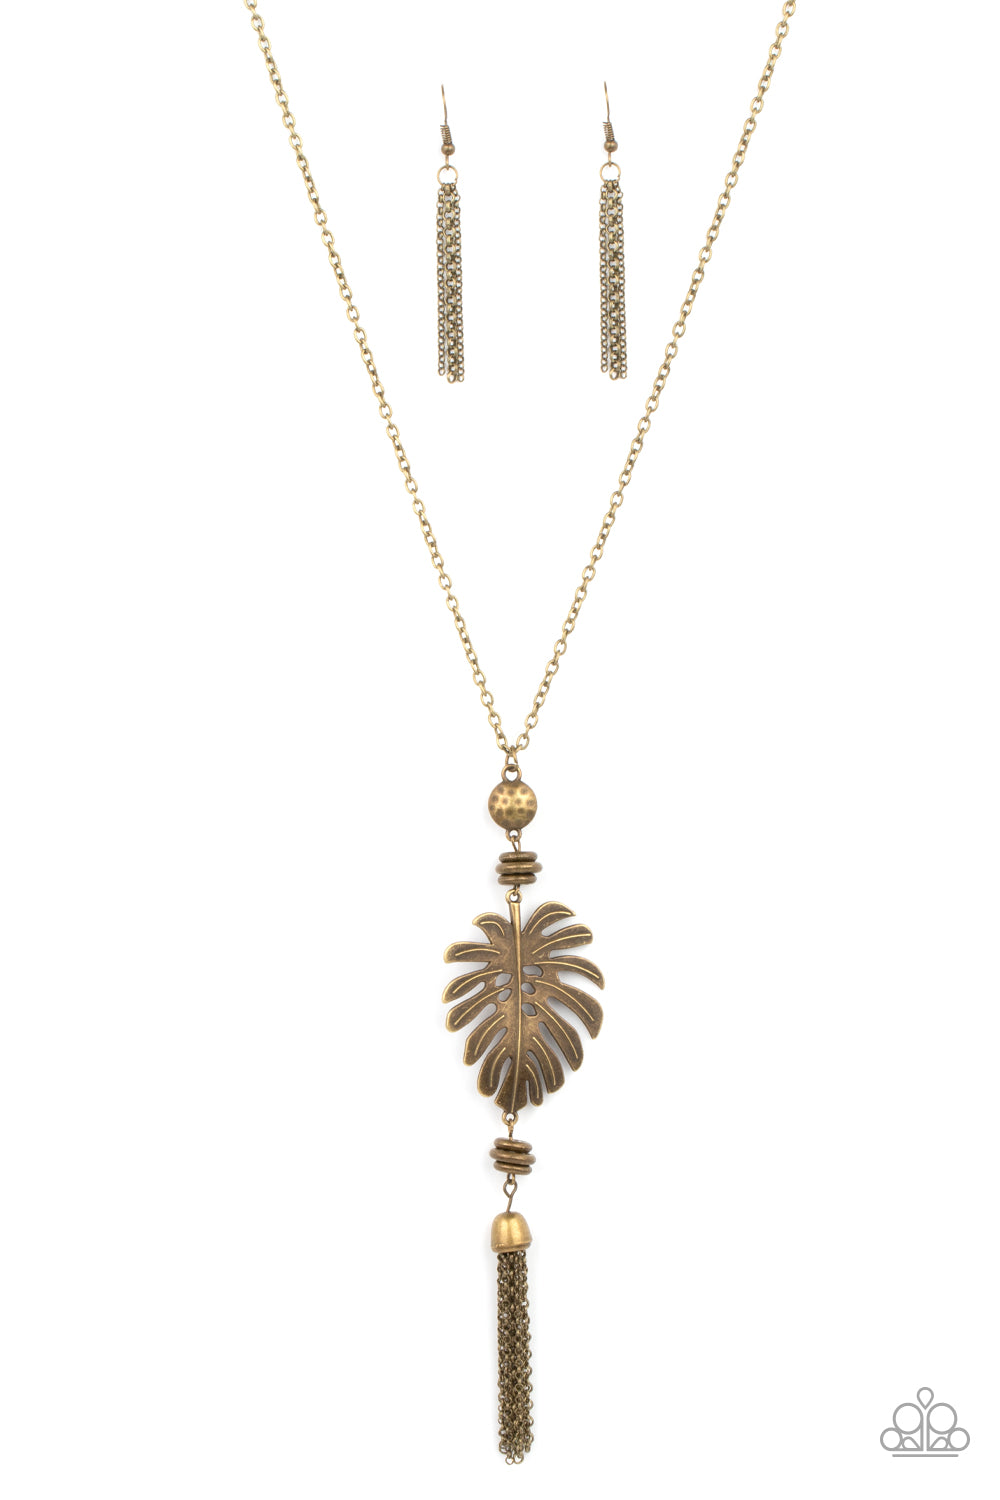 Palm Promenade Brass Necklace - Paparazzi Accessories  Infused with brass beaded accents, a lifelike brass palm leaf frame attaches to the bottom of a rustic brass chain. An antiqued brass chain tassel swings from the bottom, adding flirtatious movement to the summery statement piece. Features an adjustable clasp closure.  All Paparazzi Accessories are lead free and nickel free!  Sold as one individual necklace. Includes one pair of matching earrings.